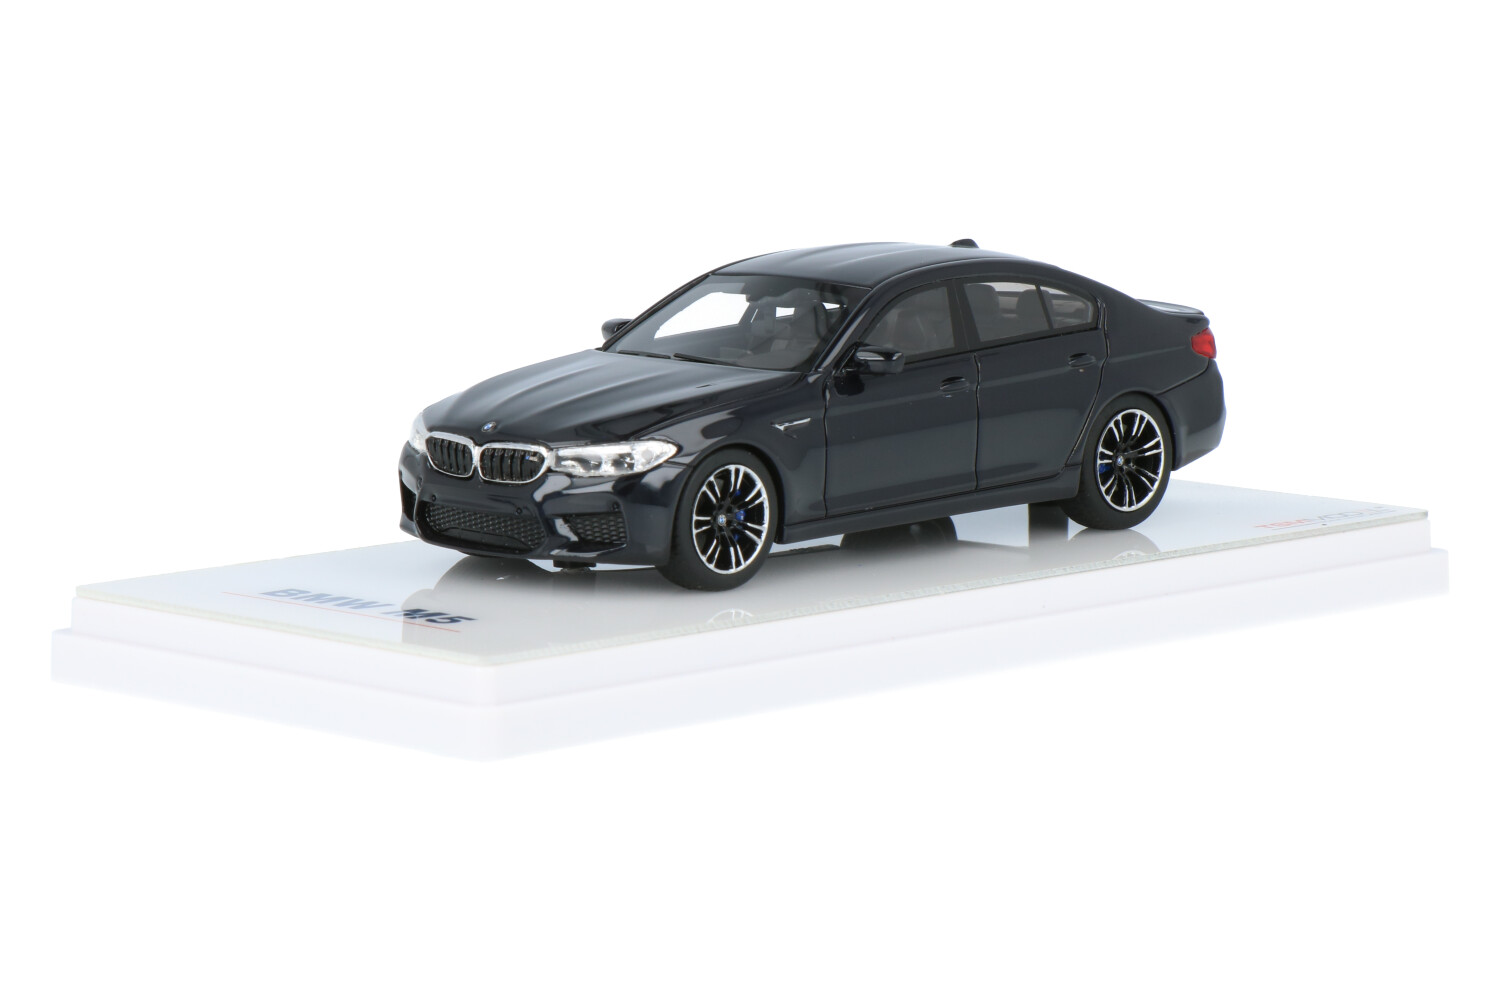 https://www.houseofmodelcars.com/images/BMW_M5_F90_TSM430380_13154895183608244BMW_M5_F90_TSM430380_Houseofmodelcars.jpg?width=1000